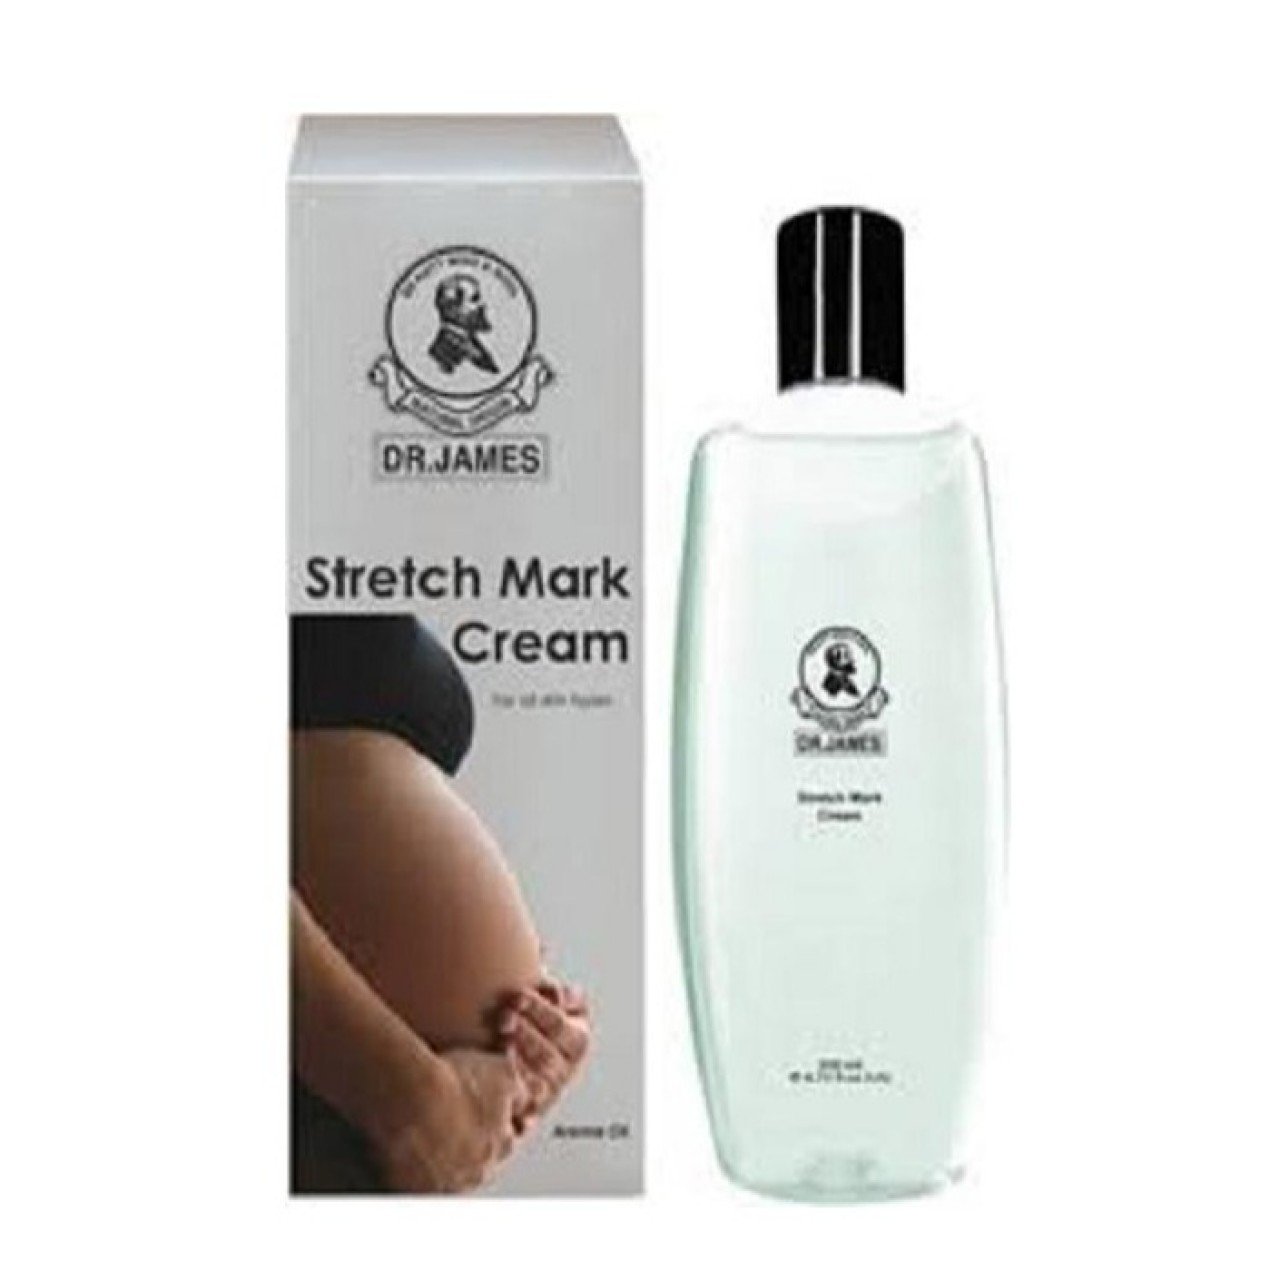 Stretch Mark Cream In Pakistan Our Great Shopping